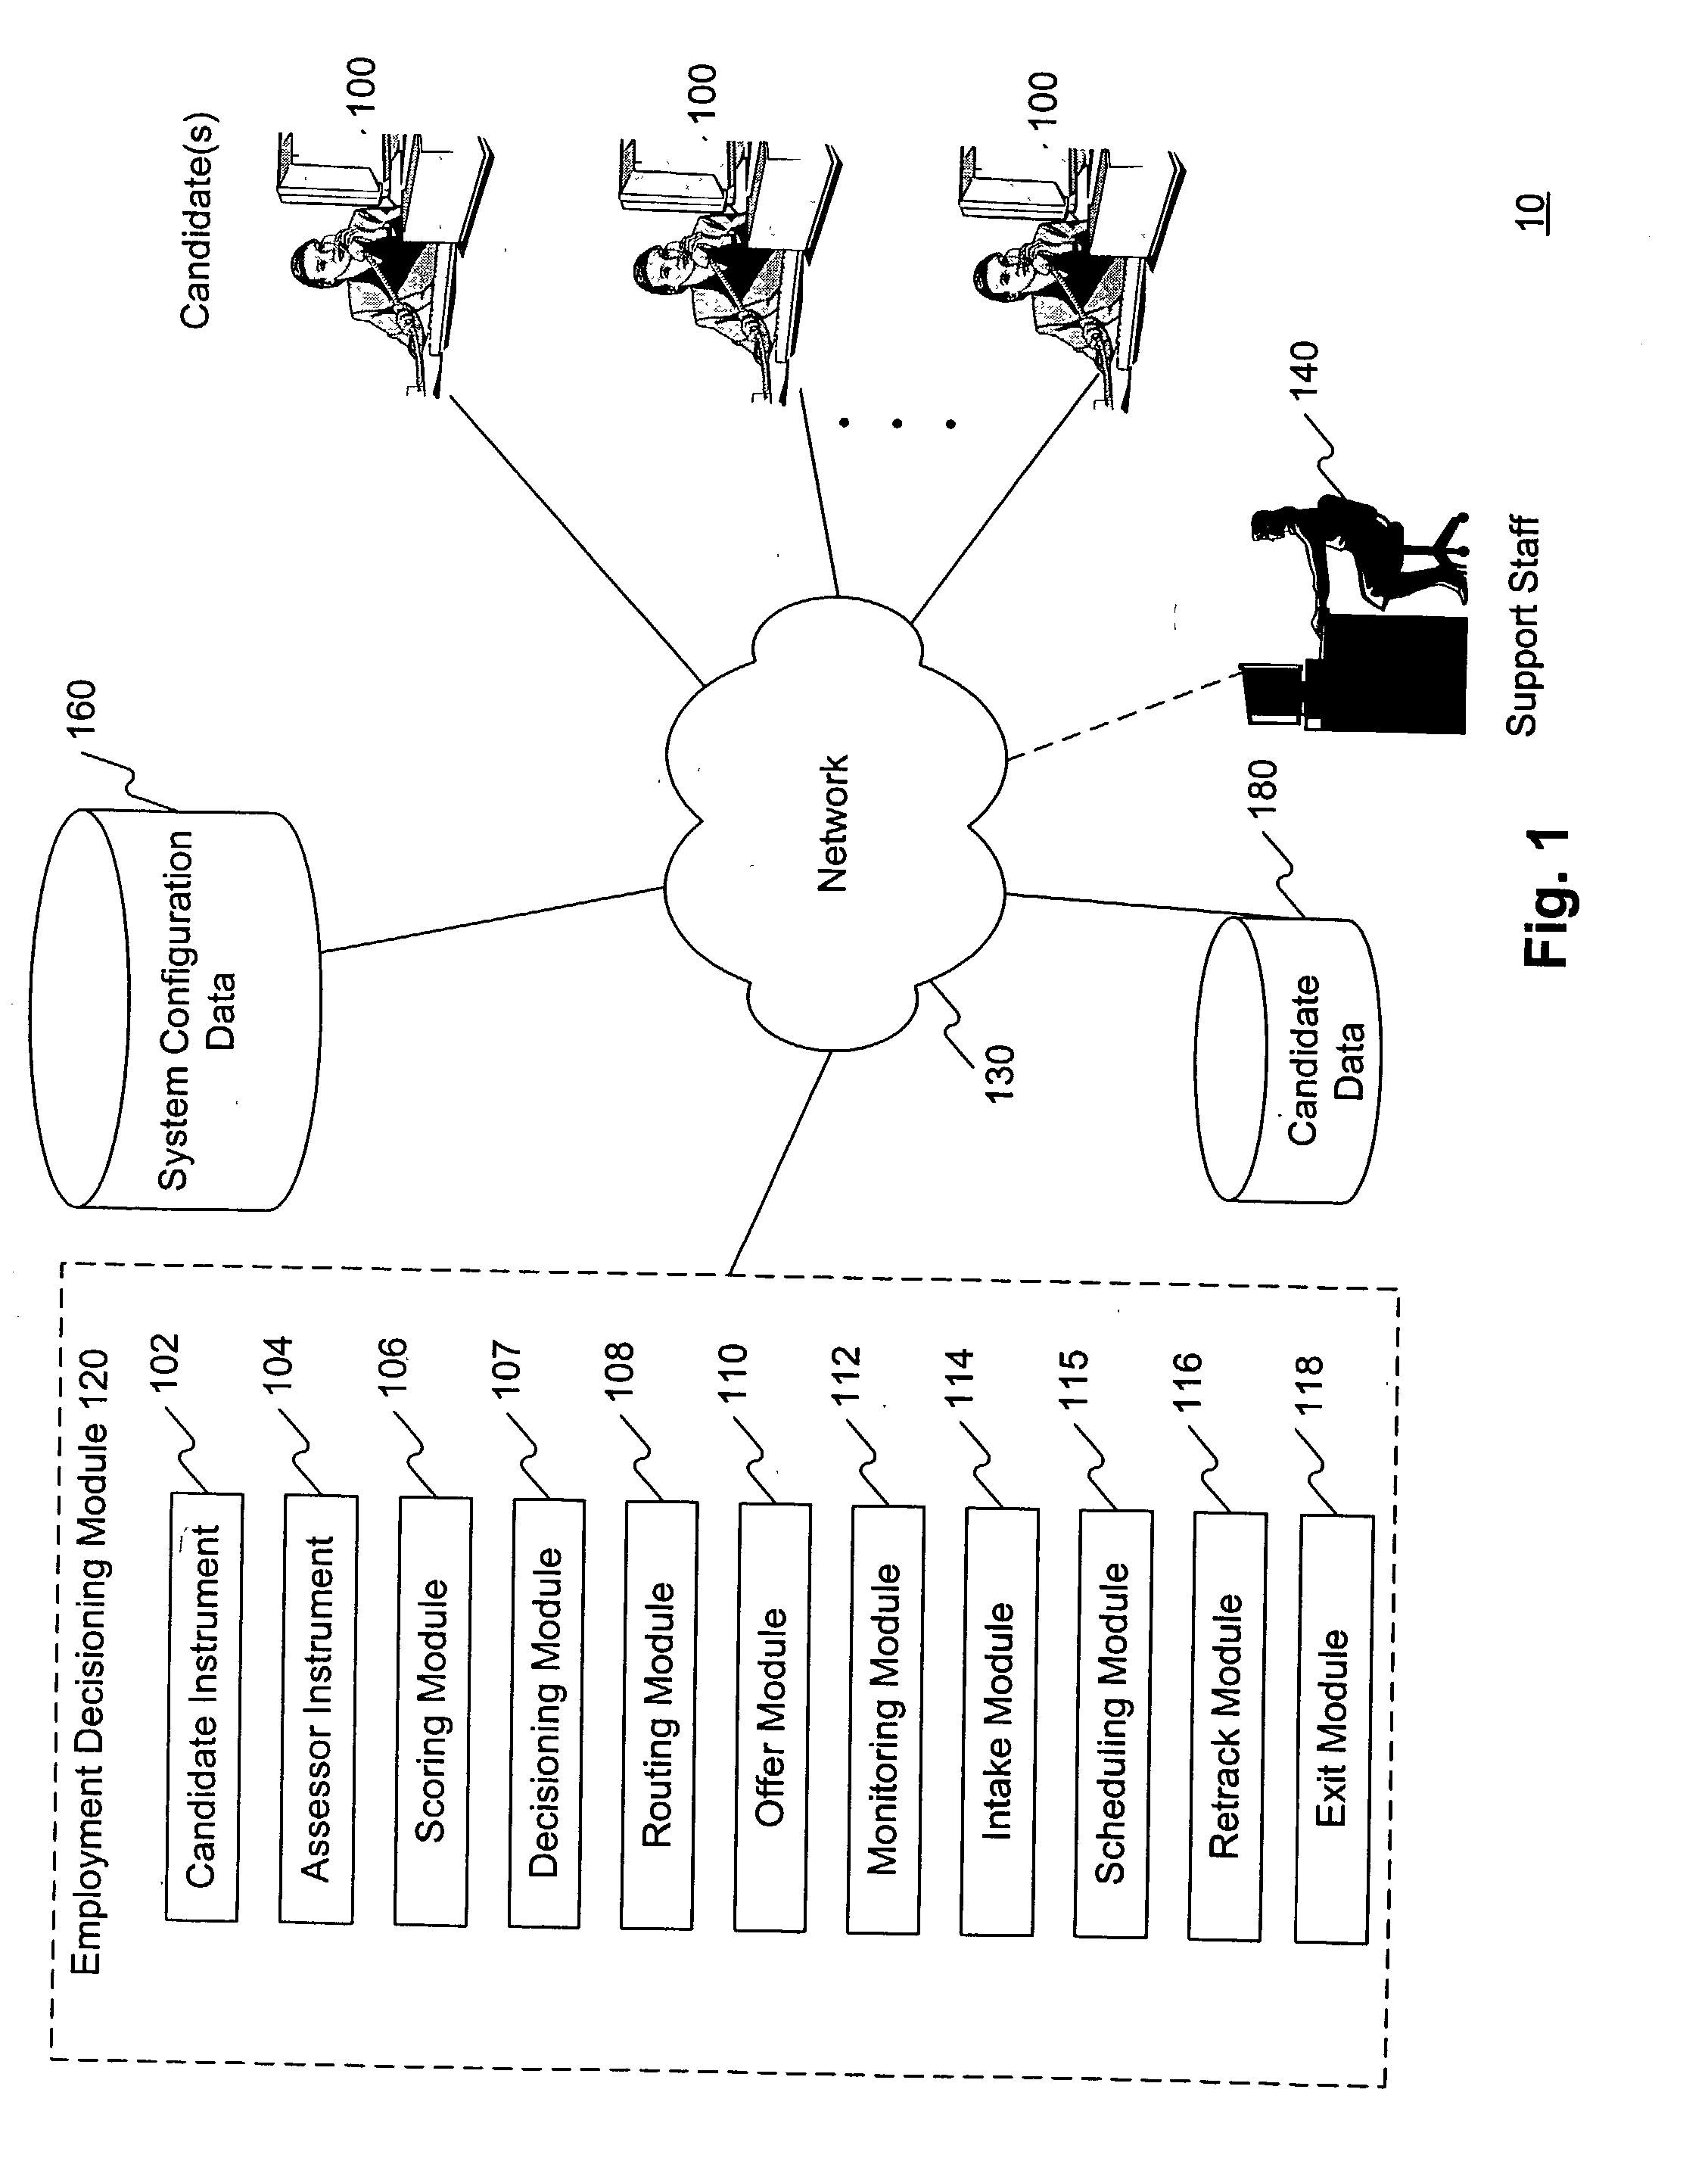 Systems and methods for network-based employment decisioning